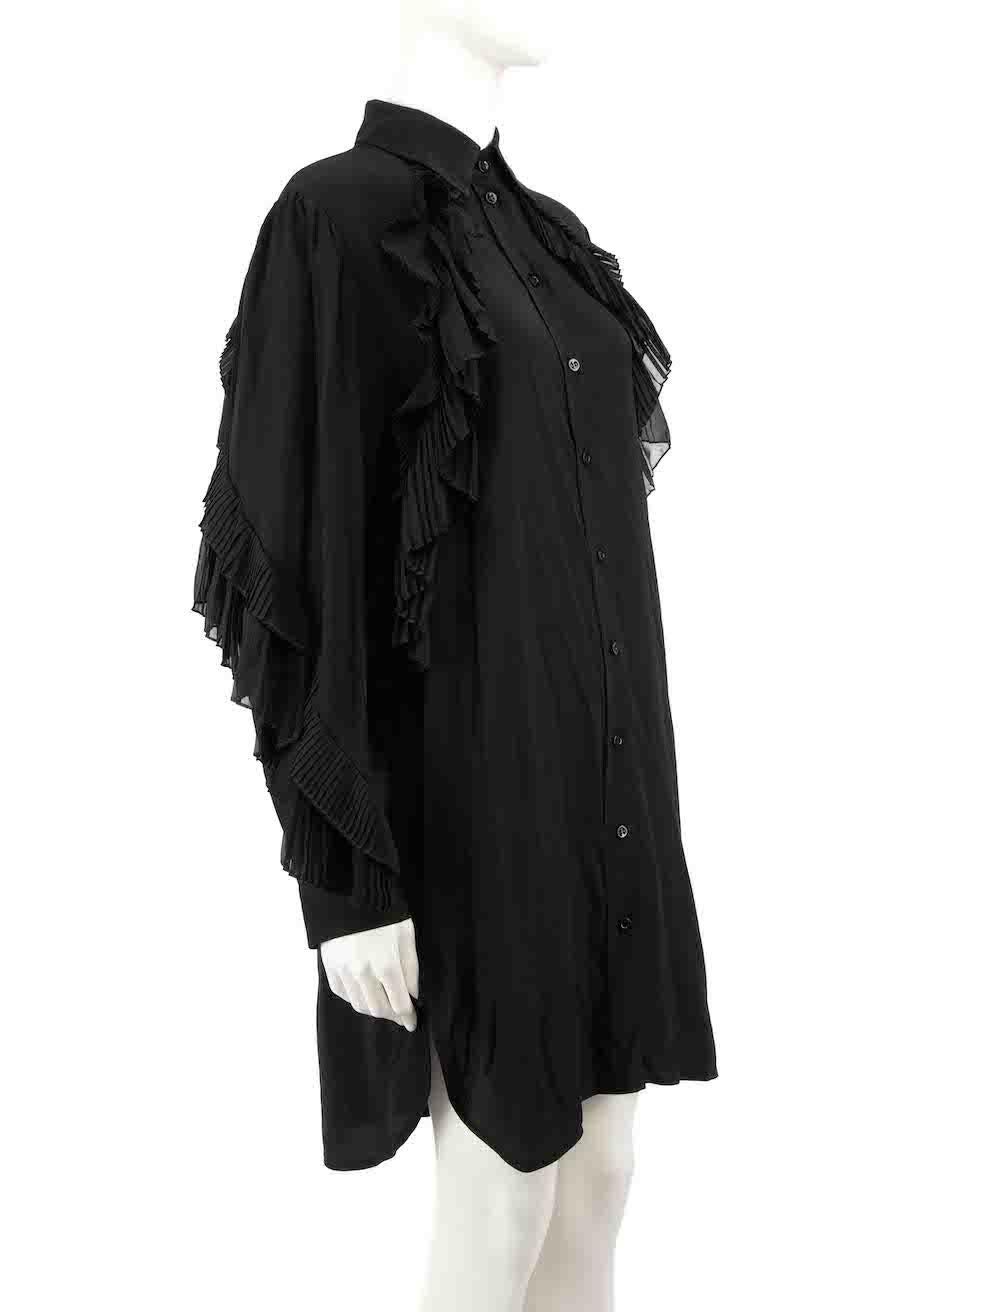 CONDITION is Never worn, with tags. No visible wear to dress, however there are two small marks at the shoulders due to poor storage is evident on this new Givenchy designer resale item.
 
 
 
 Details
 
 
 Black
 
 Silk
 
 Shirt dress
 
 Mini